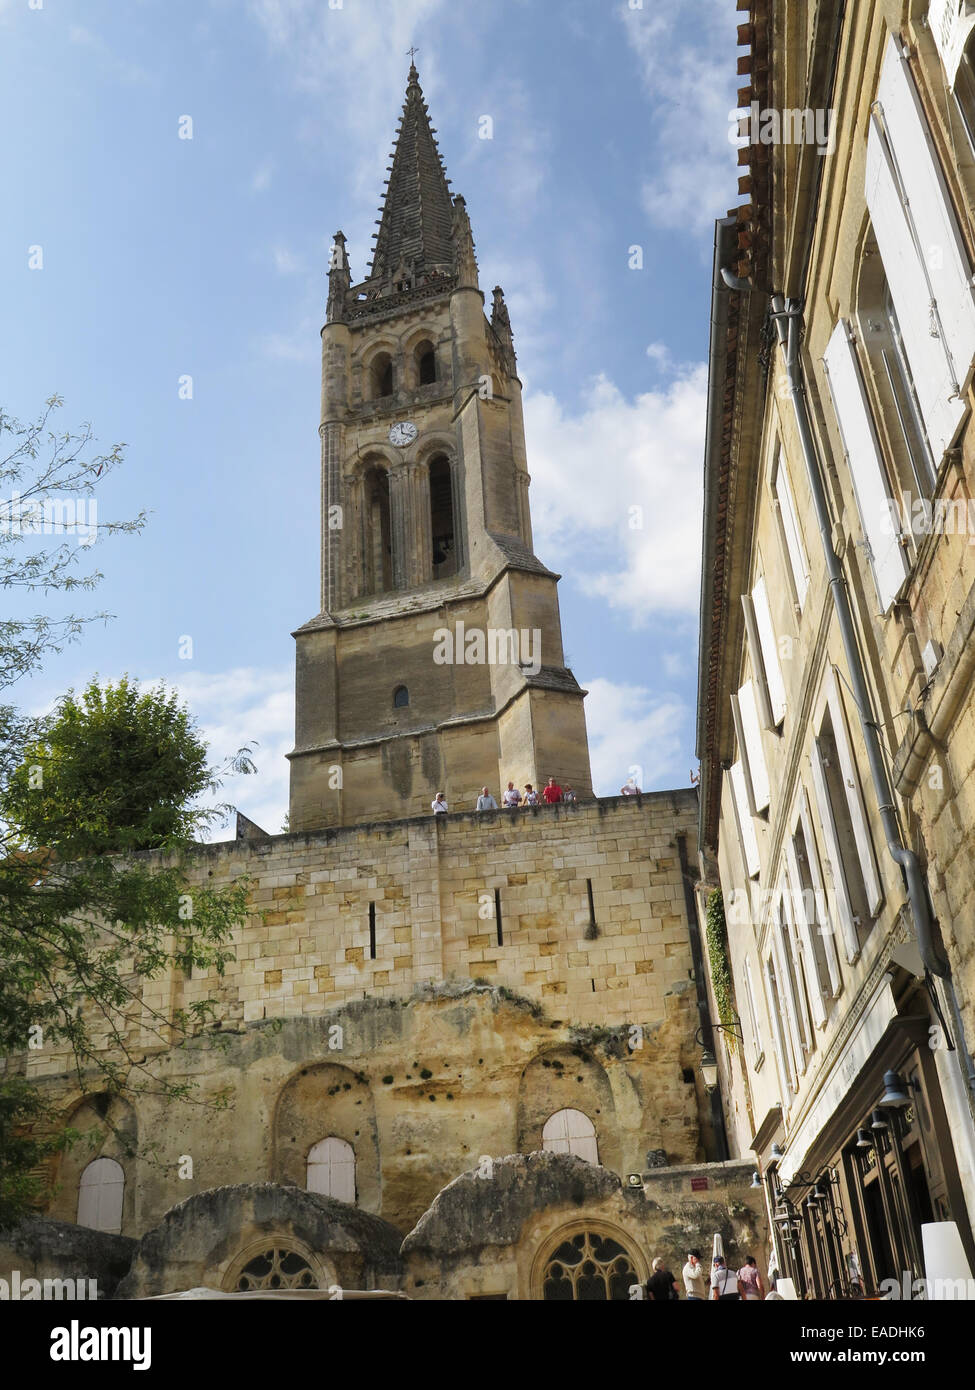 Monolithic Church and Bell Tower at St Emilion, Bordeaux, France Stock Photo